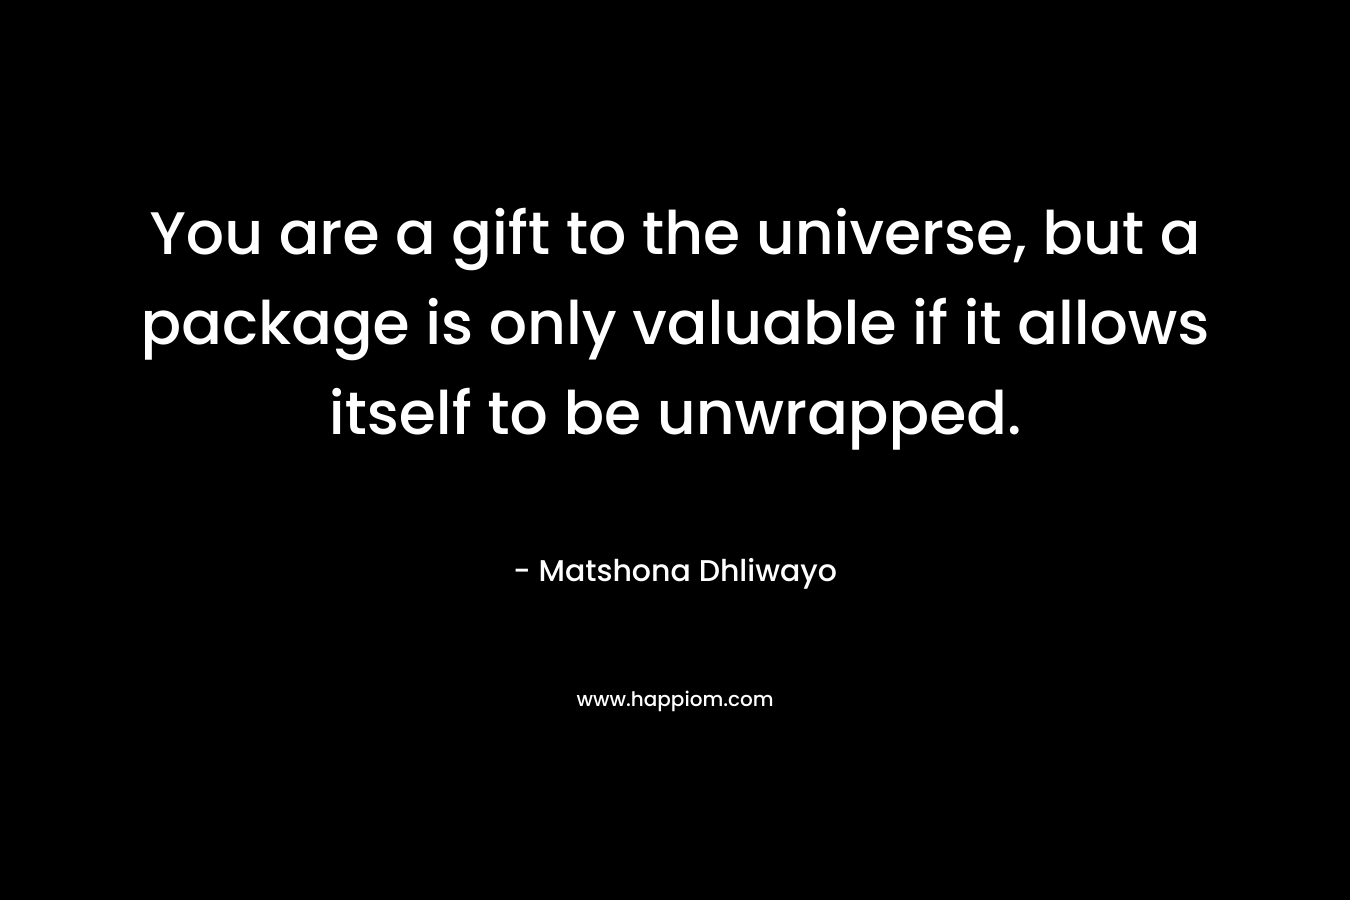 You are a gift to the universe, but a package is only valuable if it allows itself to be unwrapped. – Matshona Dhliwayo